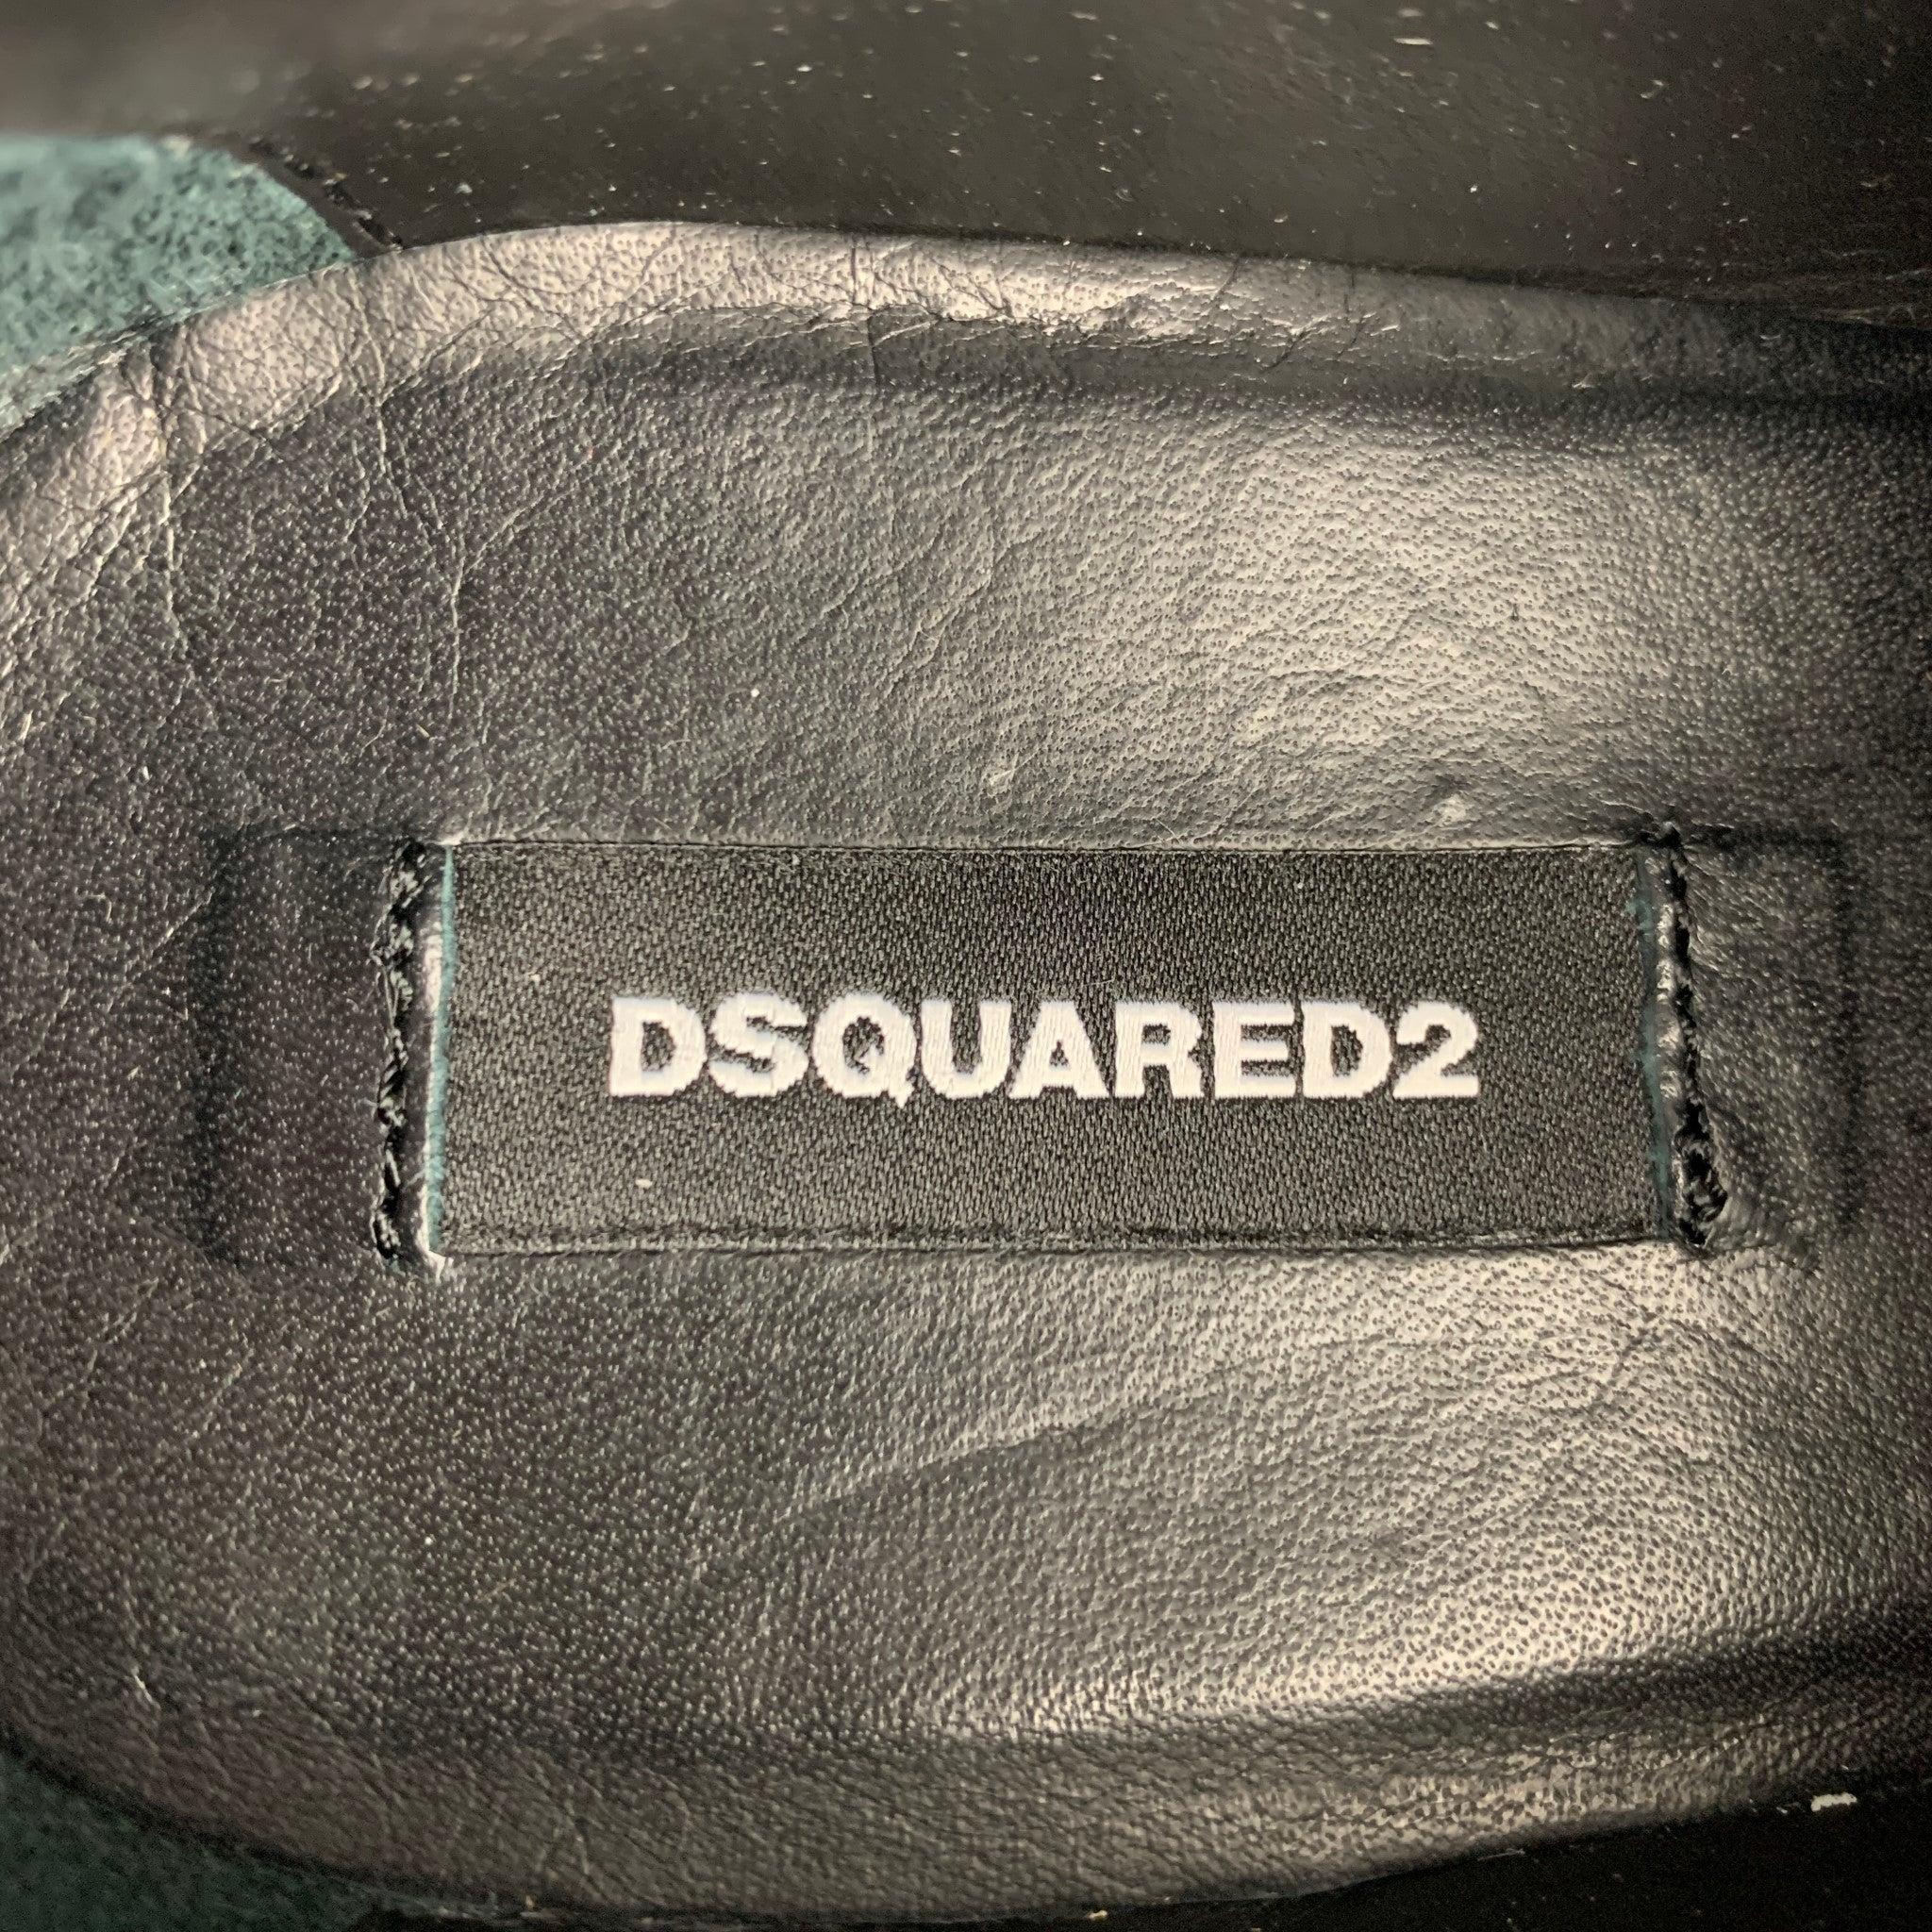 DSQUARED2 Worlds End Size 9 Black Leather Studded Lace Up Shoes For Sale 3